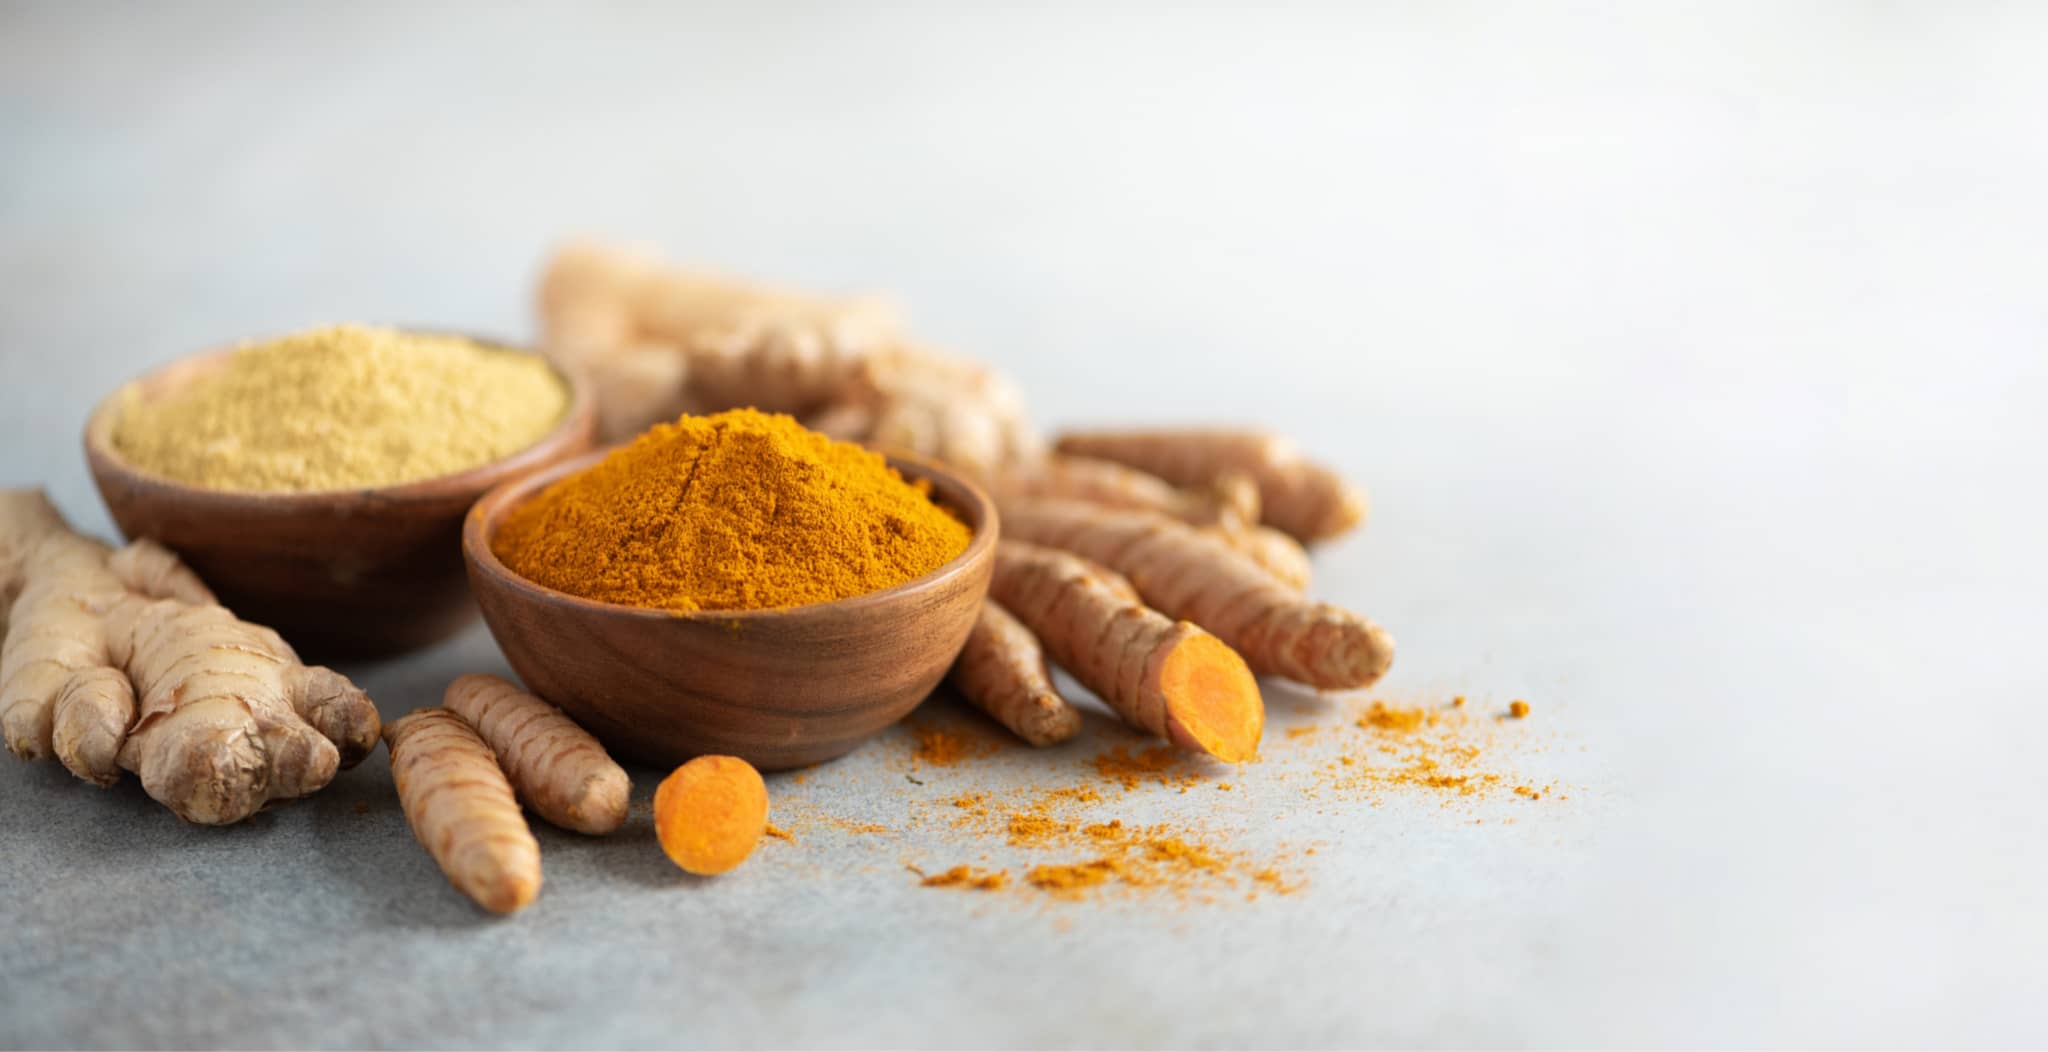 EQU Streamz blog article on Turmeric for horses and a comprehensive guide with horses